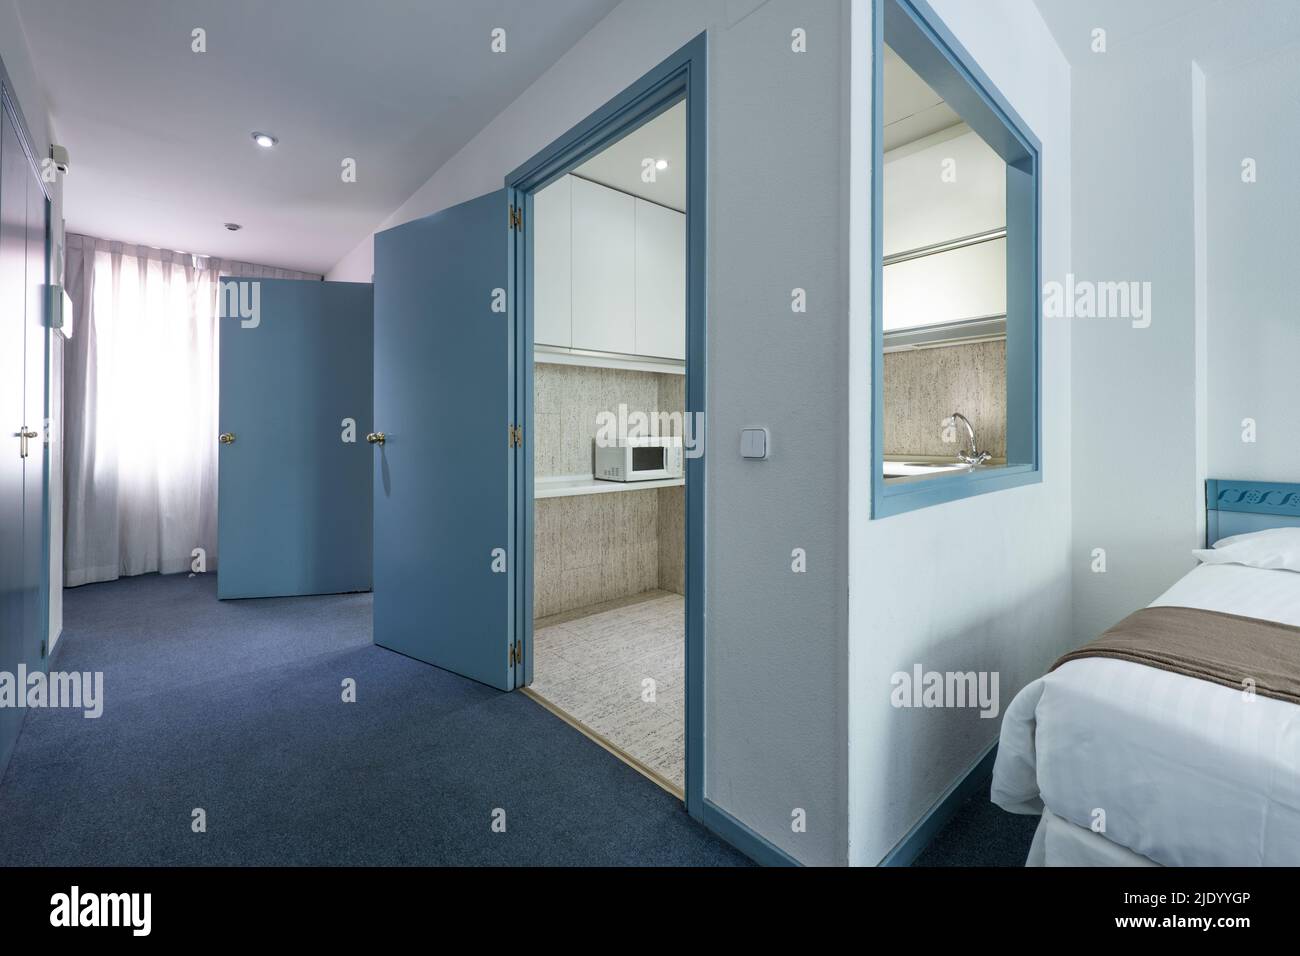 Cheap hotel room with blue carpet floors, serving hatch in the kitchen, and brown blankets on white duvets Stock Photo